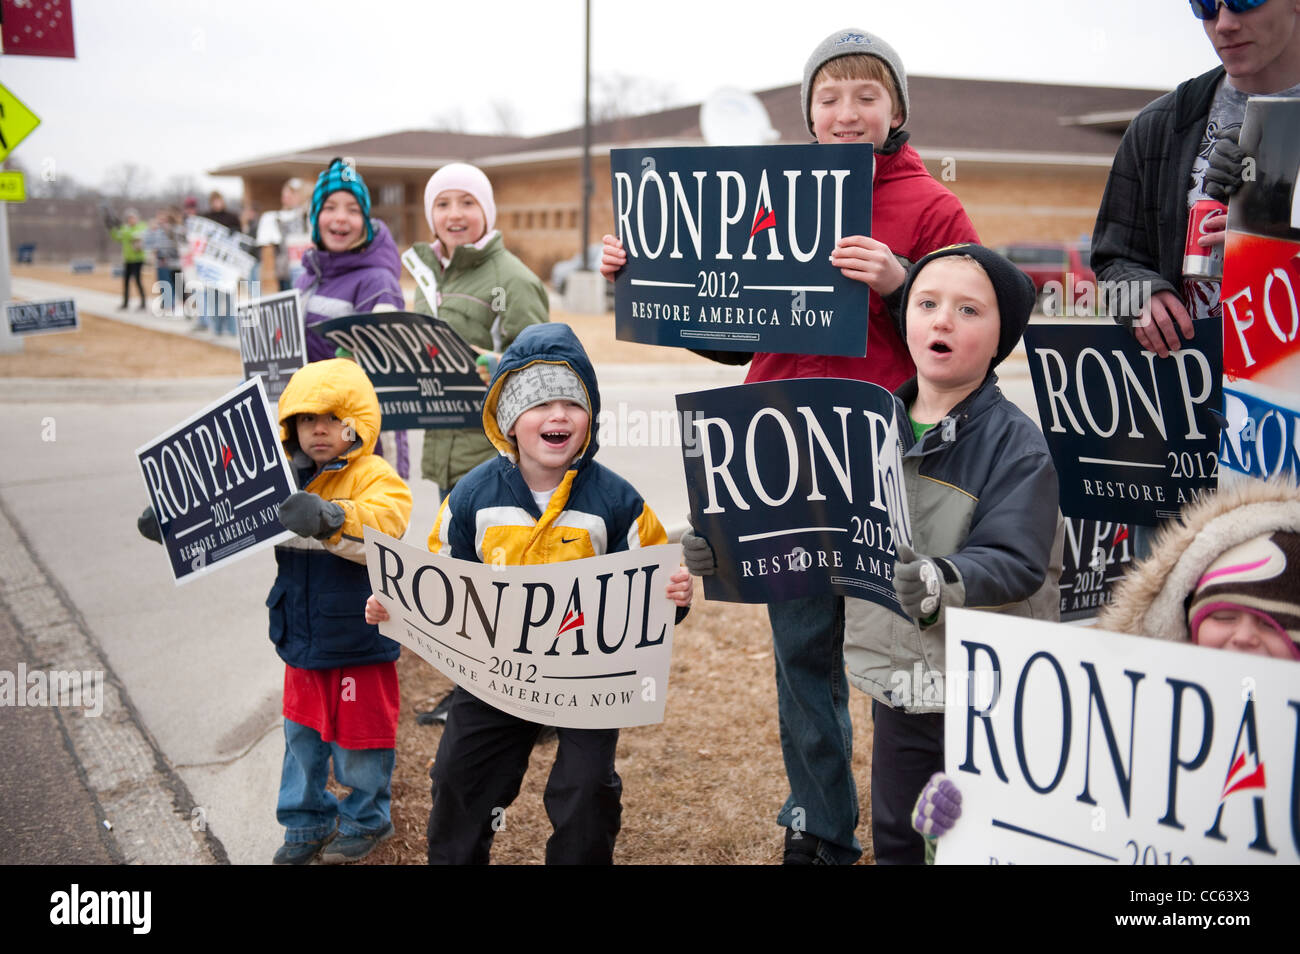 Republican presidential nominee candidate Ron Paul's supporters wave signs outside a campaign stop in Sioux Center, Iowa Stock Photo